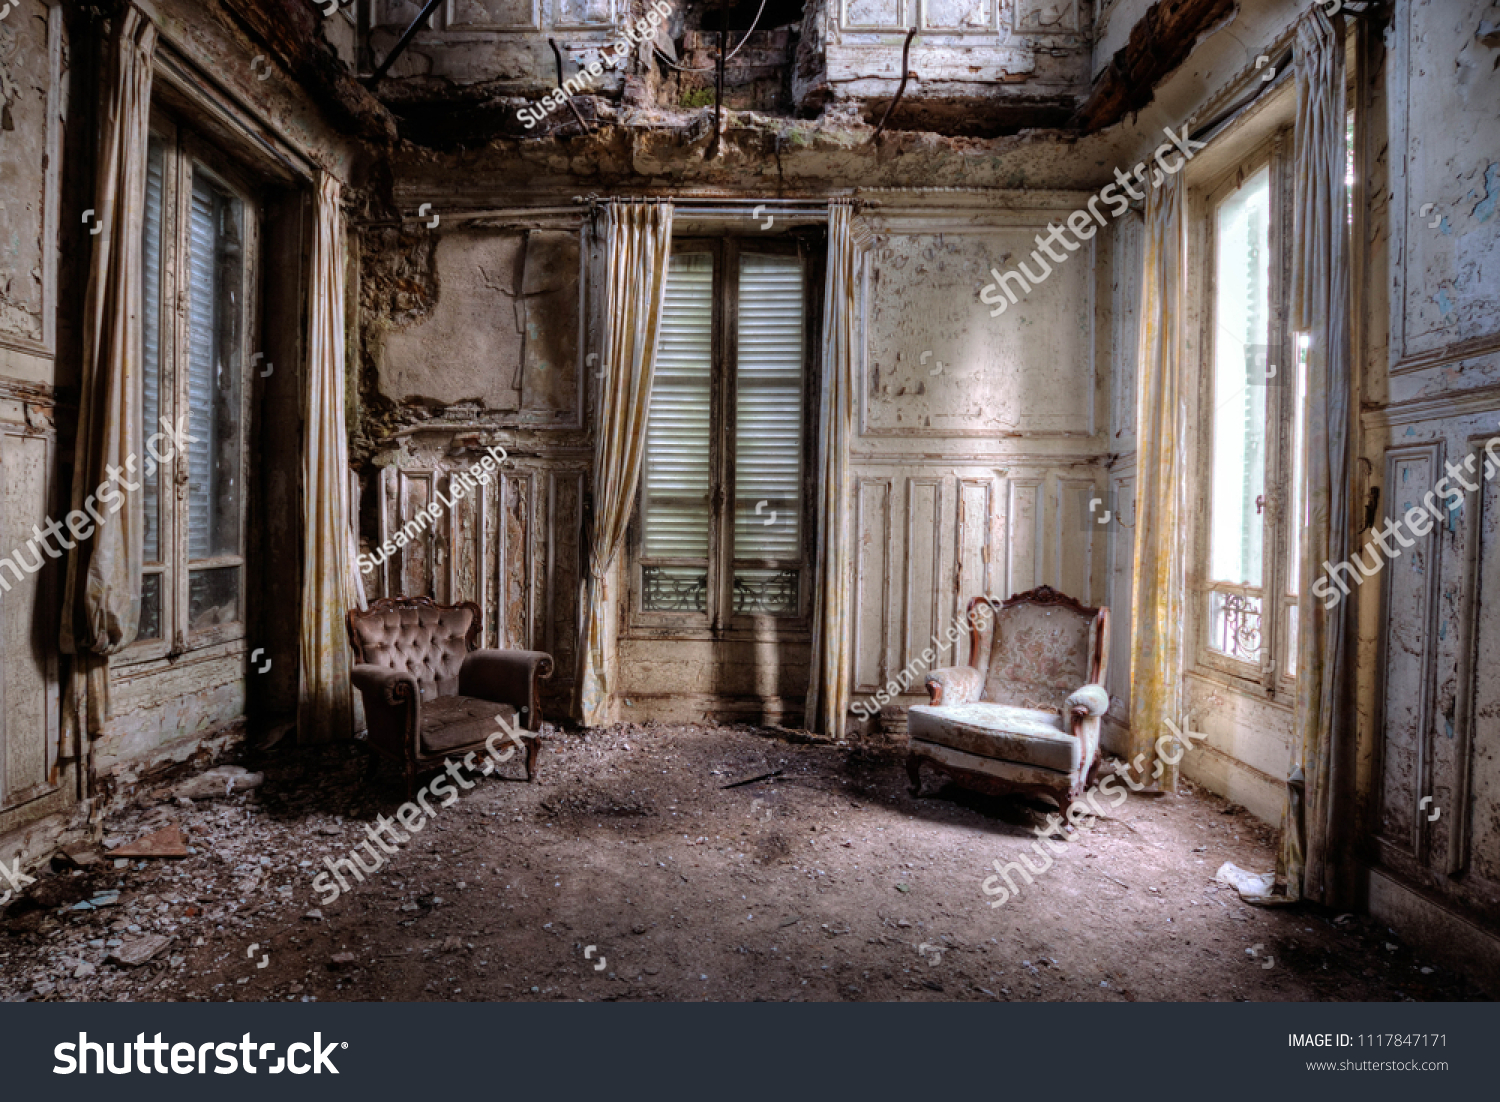 Chairs in an abandoned room in france #1117847171